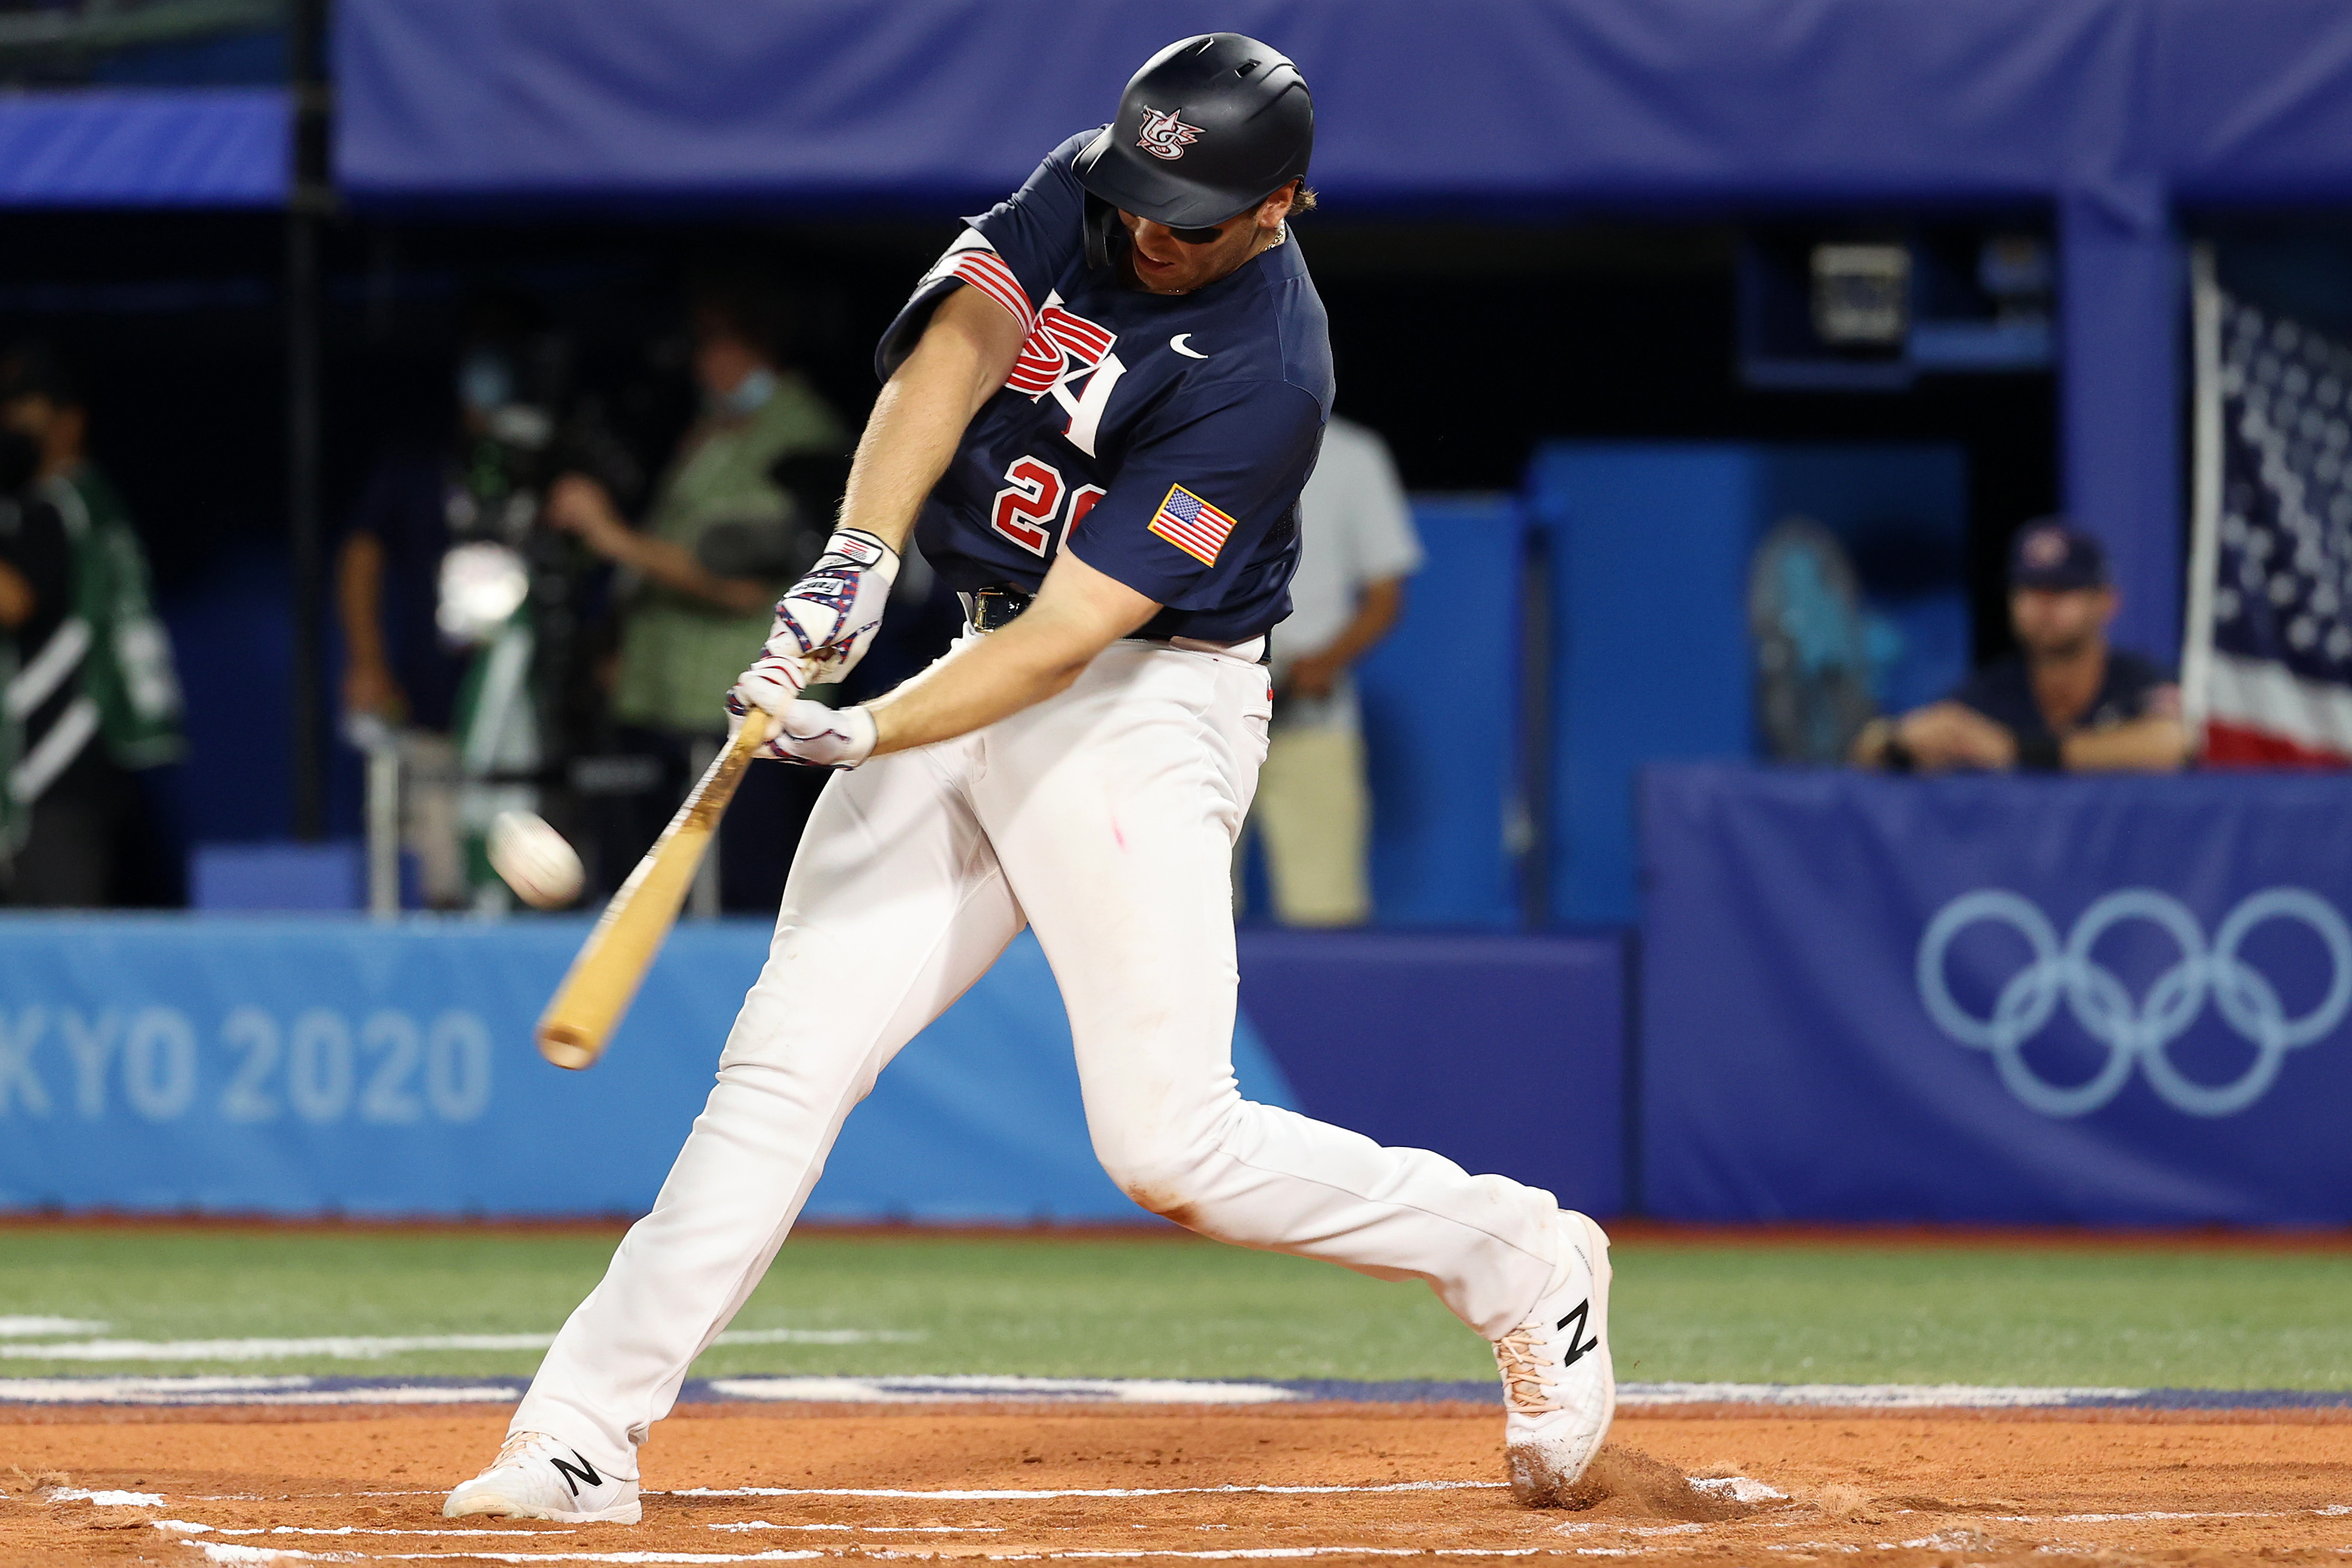 Red Sox Prospects Triston Casas, Nick Yorke, and More at Winter Warmup